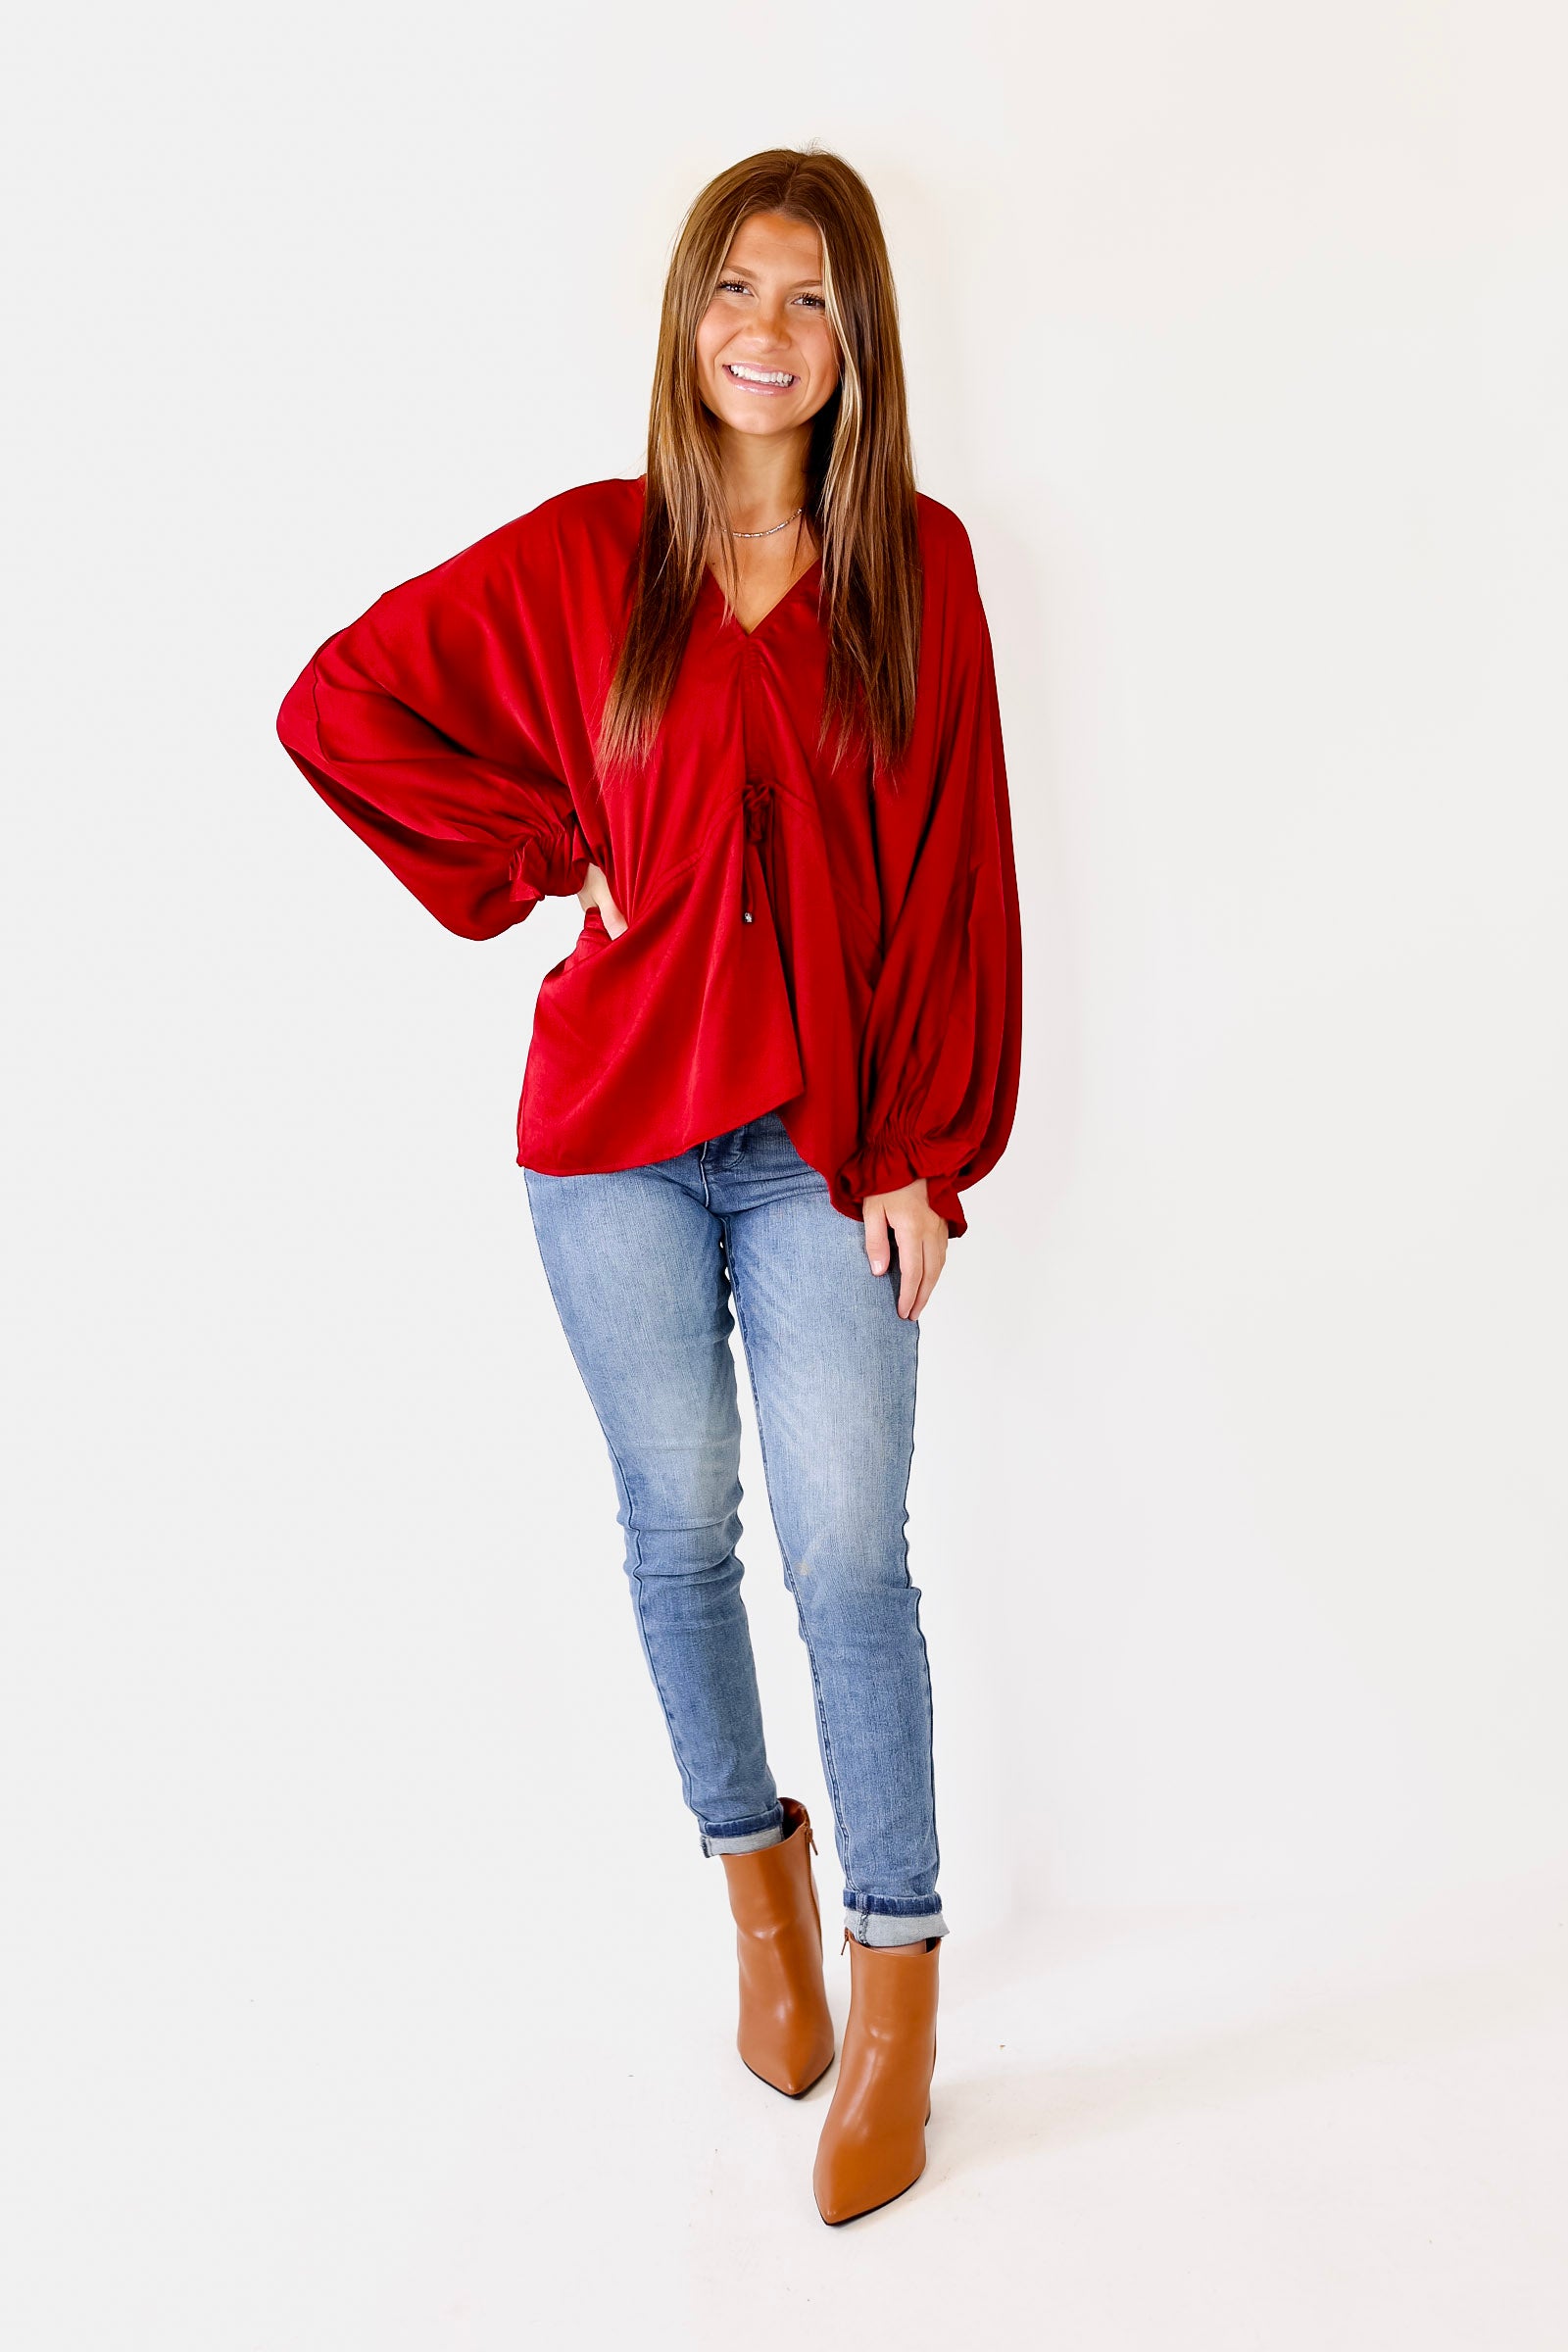 Stating Facts Satin Top with Drawstring Waist in Dark Red - Giddy Up Glamour Boutique